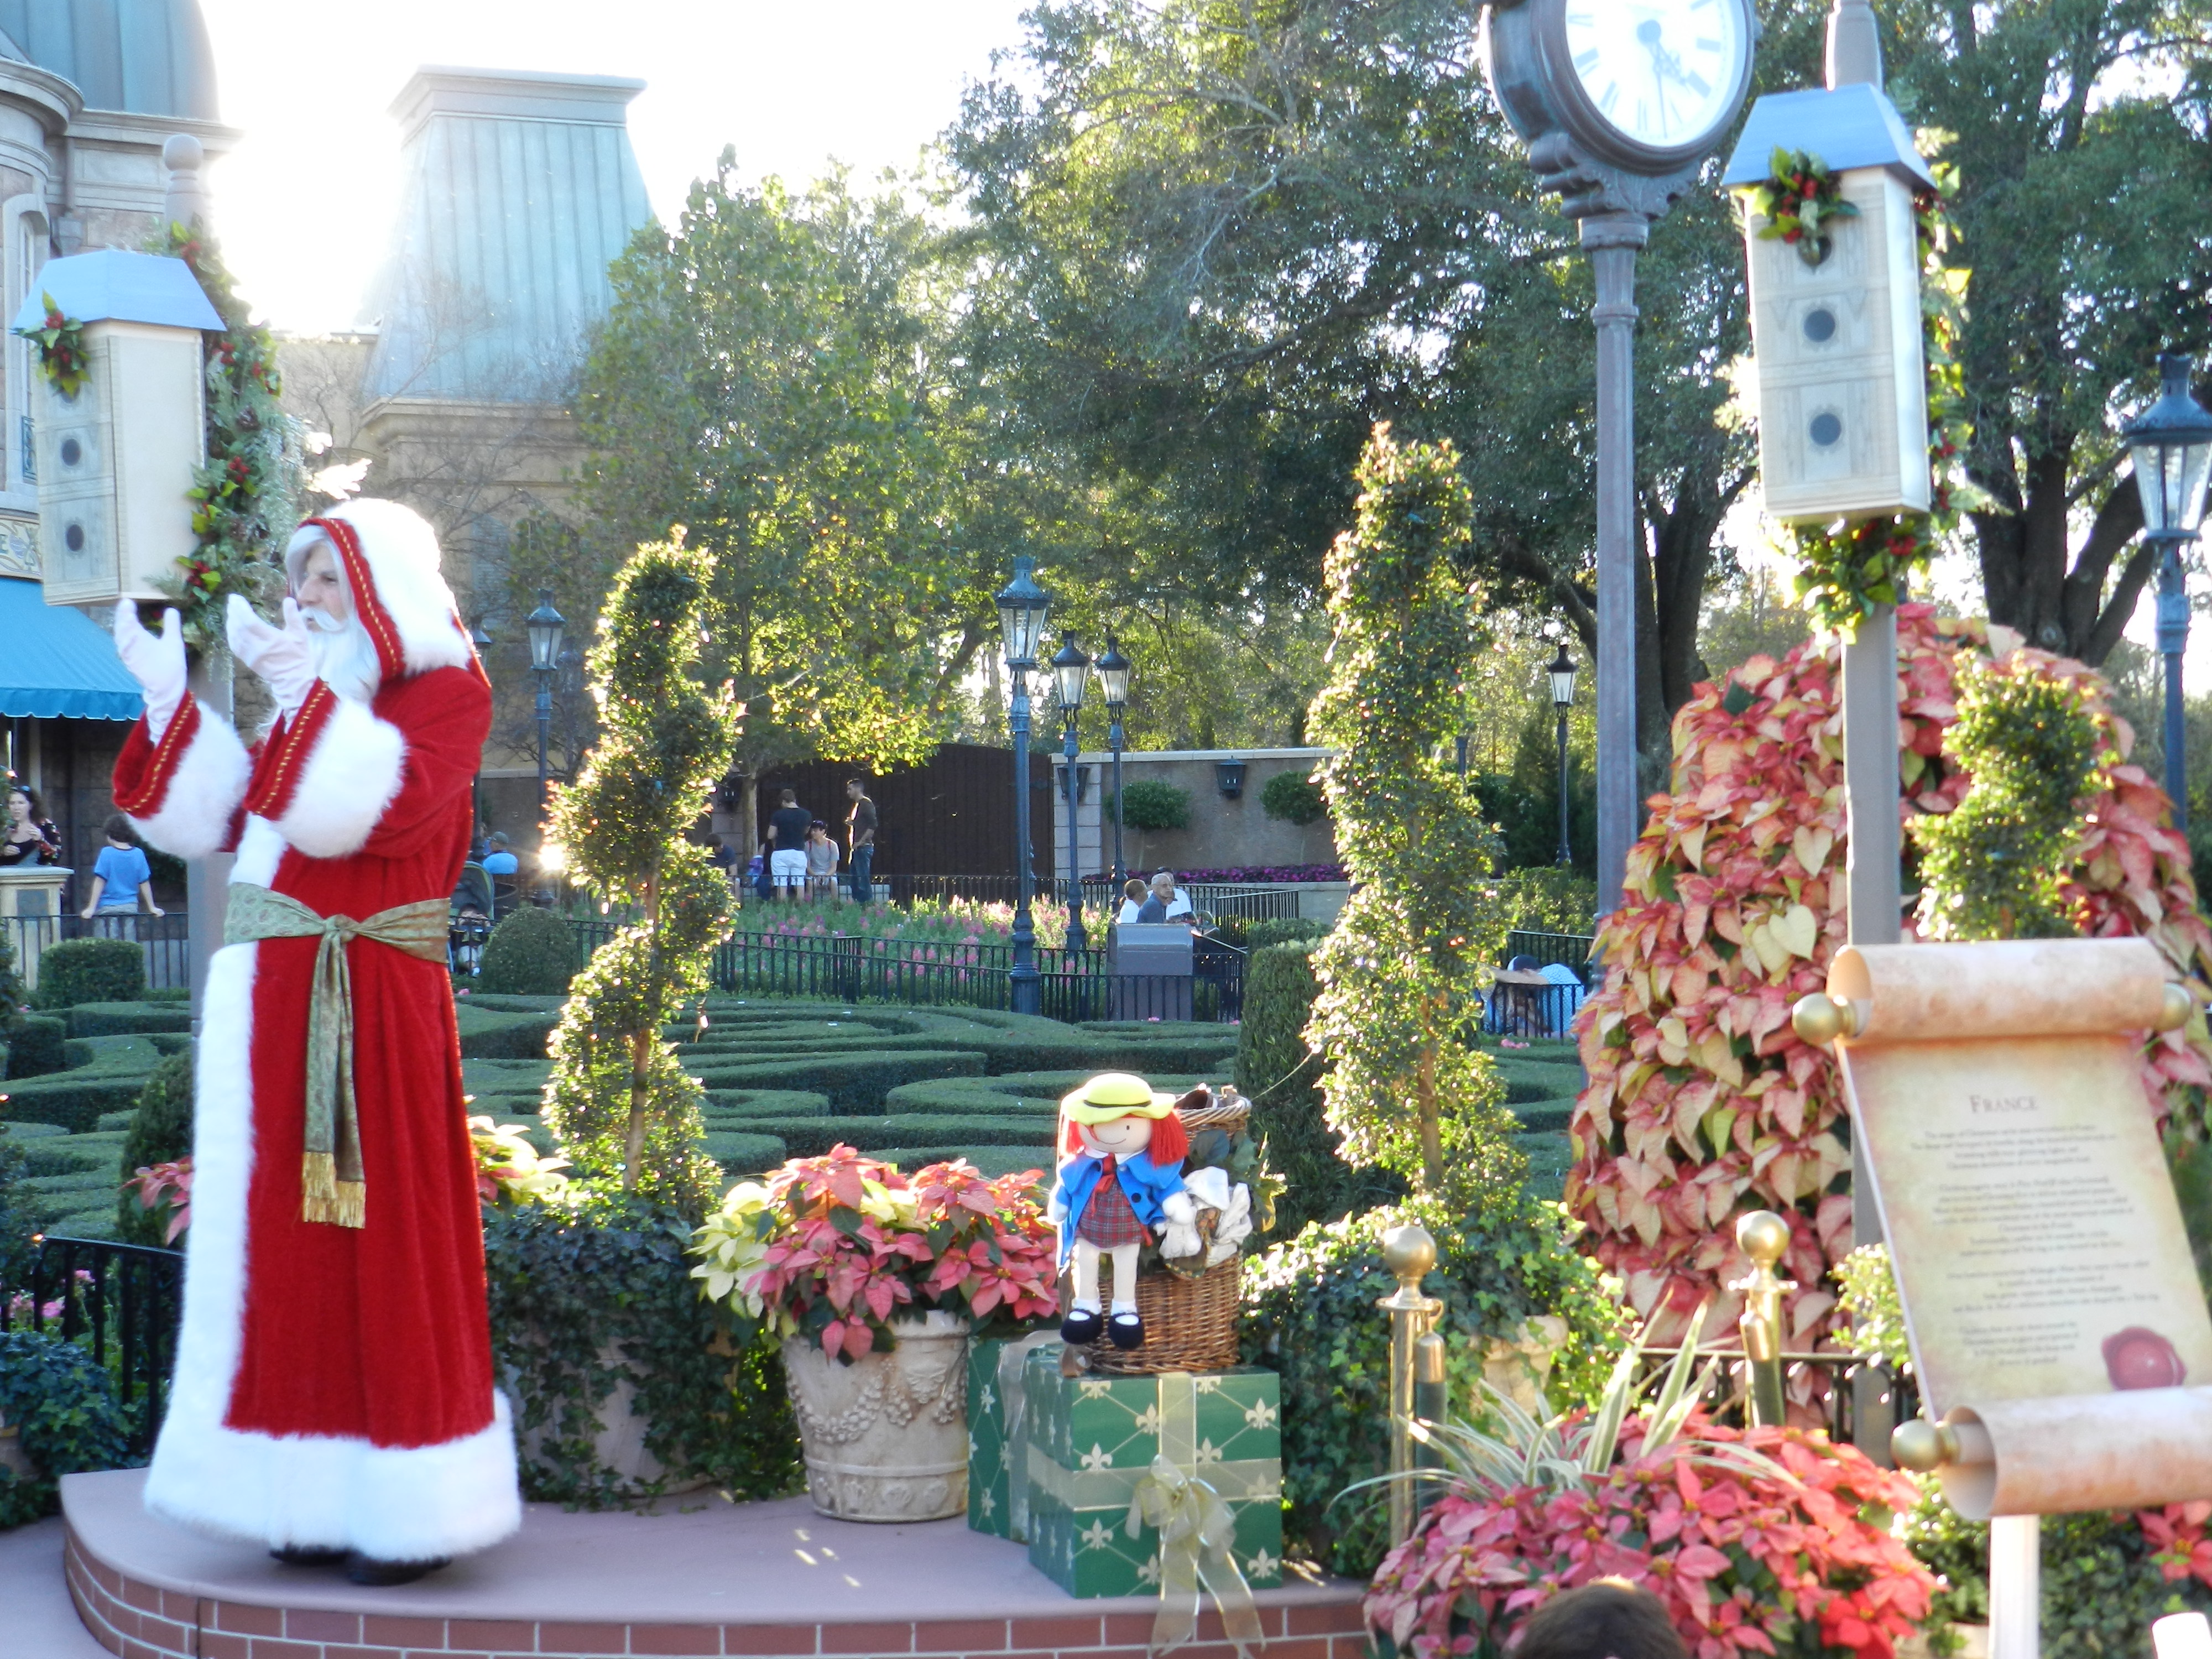 Epcot Festival of the Holidays with Pere Noel in France giving story. Keep reading to learn about the best things to do at Disney World for Christmas.